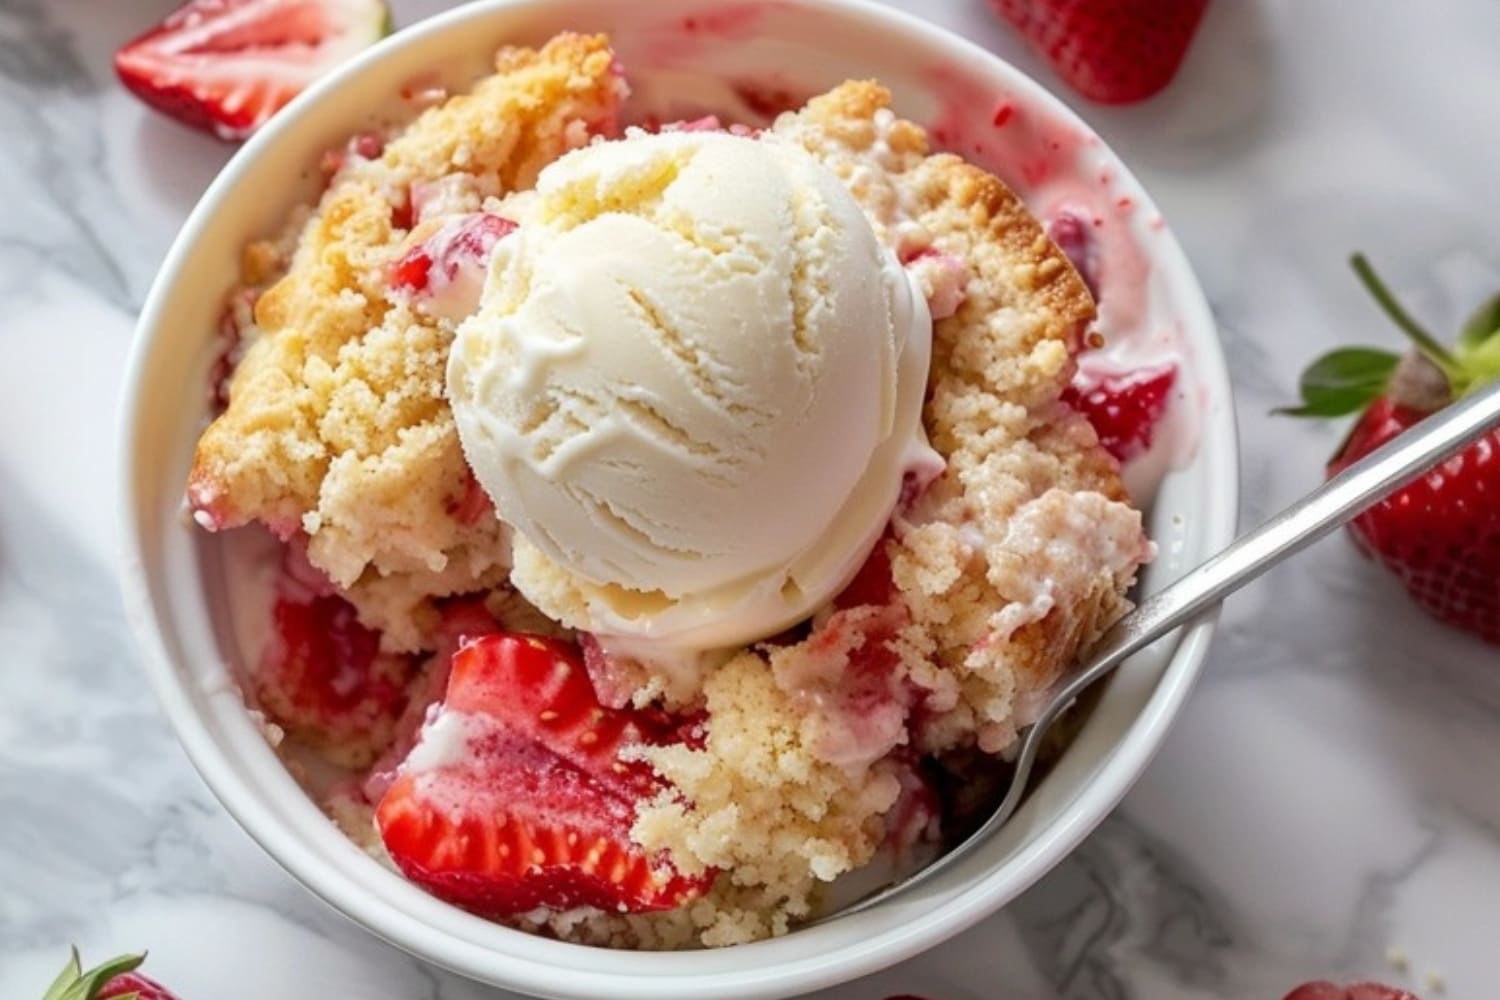 Serving of strawberry dump cake in a small white bowl topped with a scoop of vanilla ice cream.